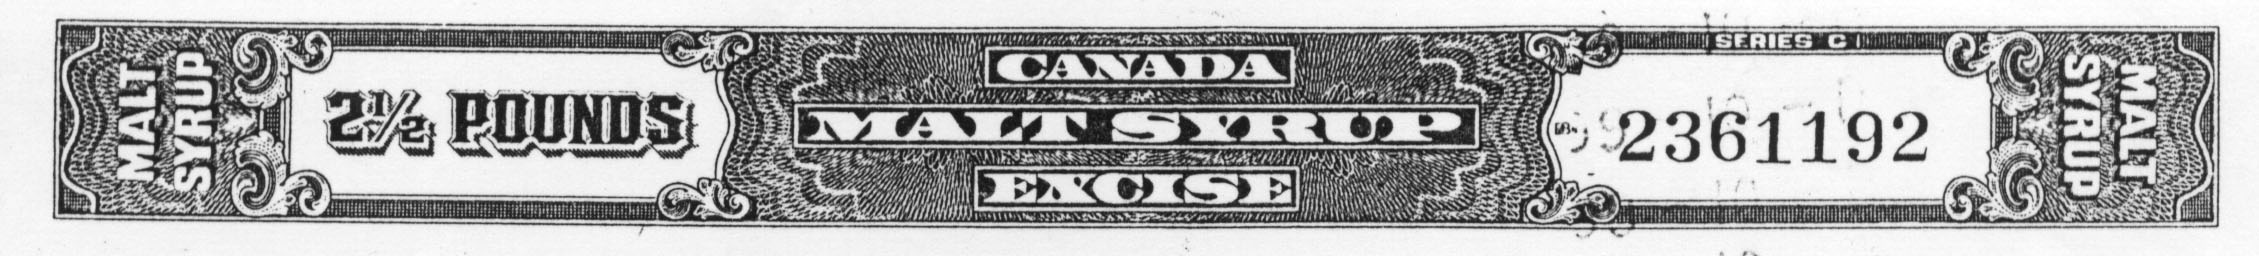 Excise Duty – Malt Syrup stamp